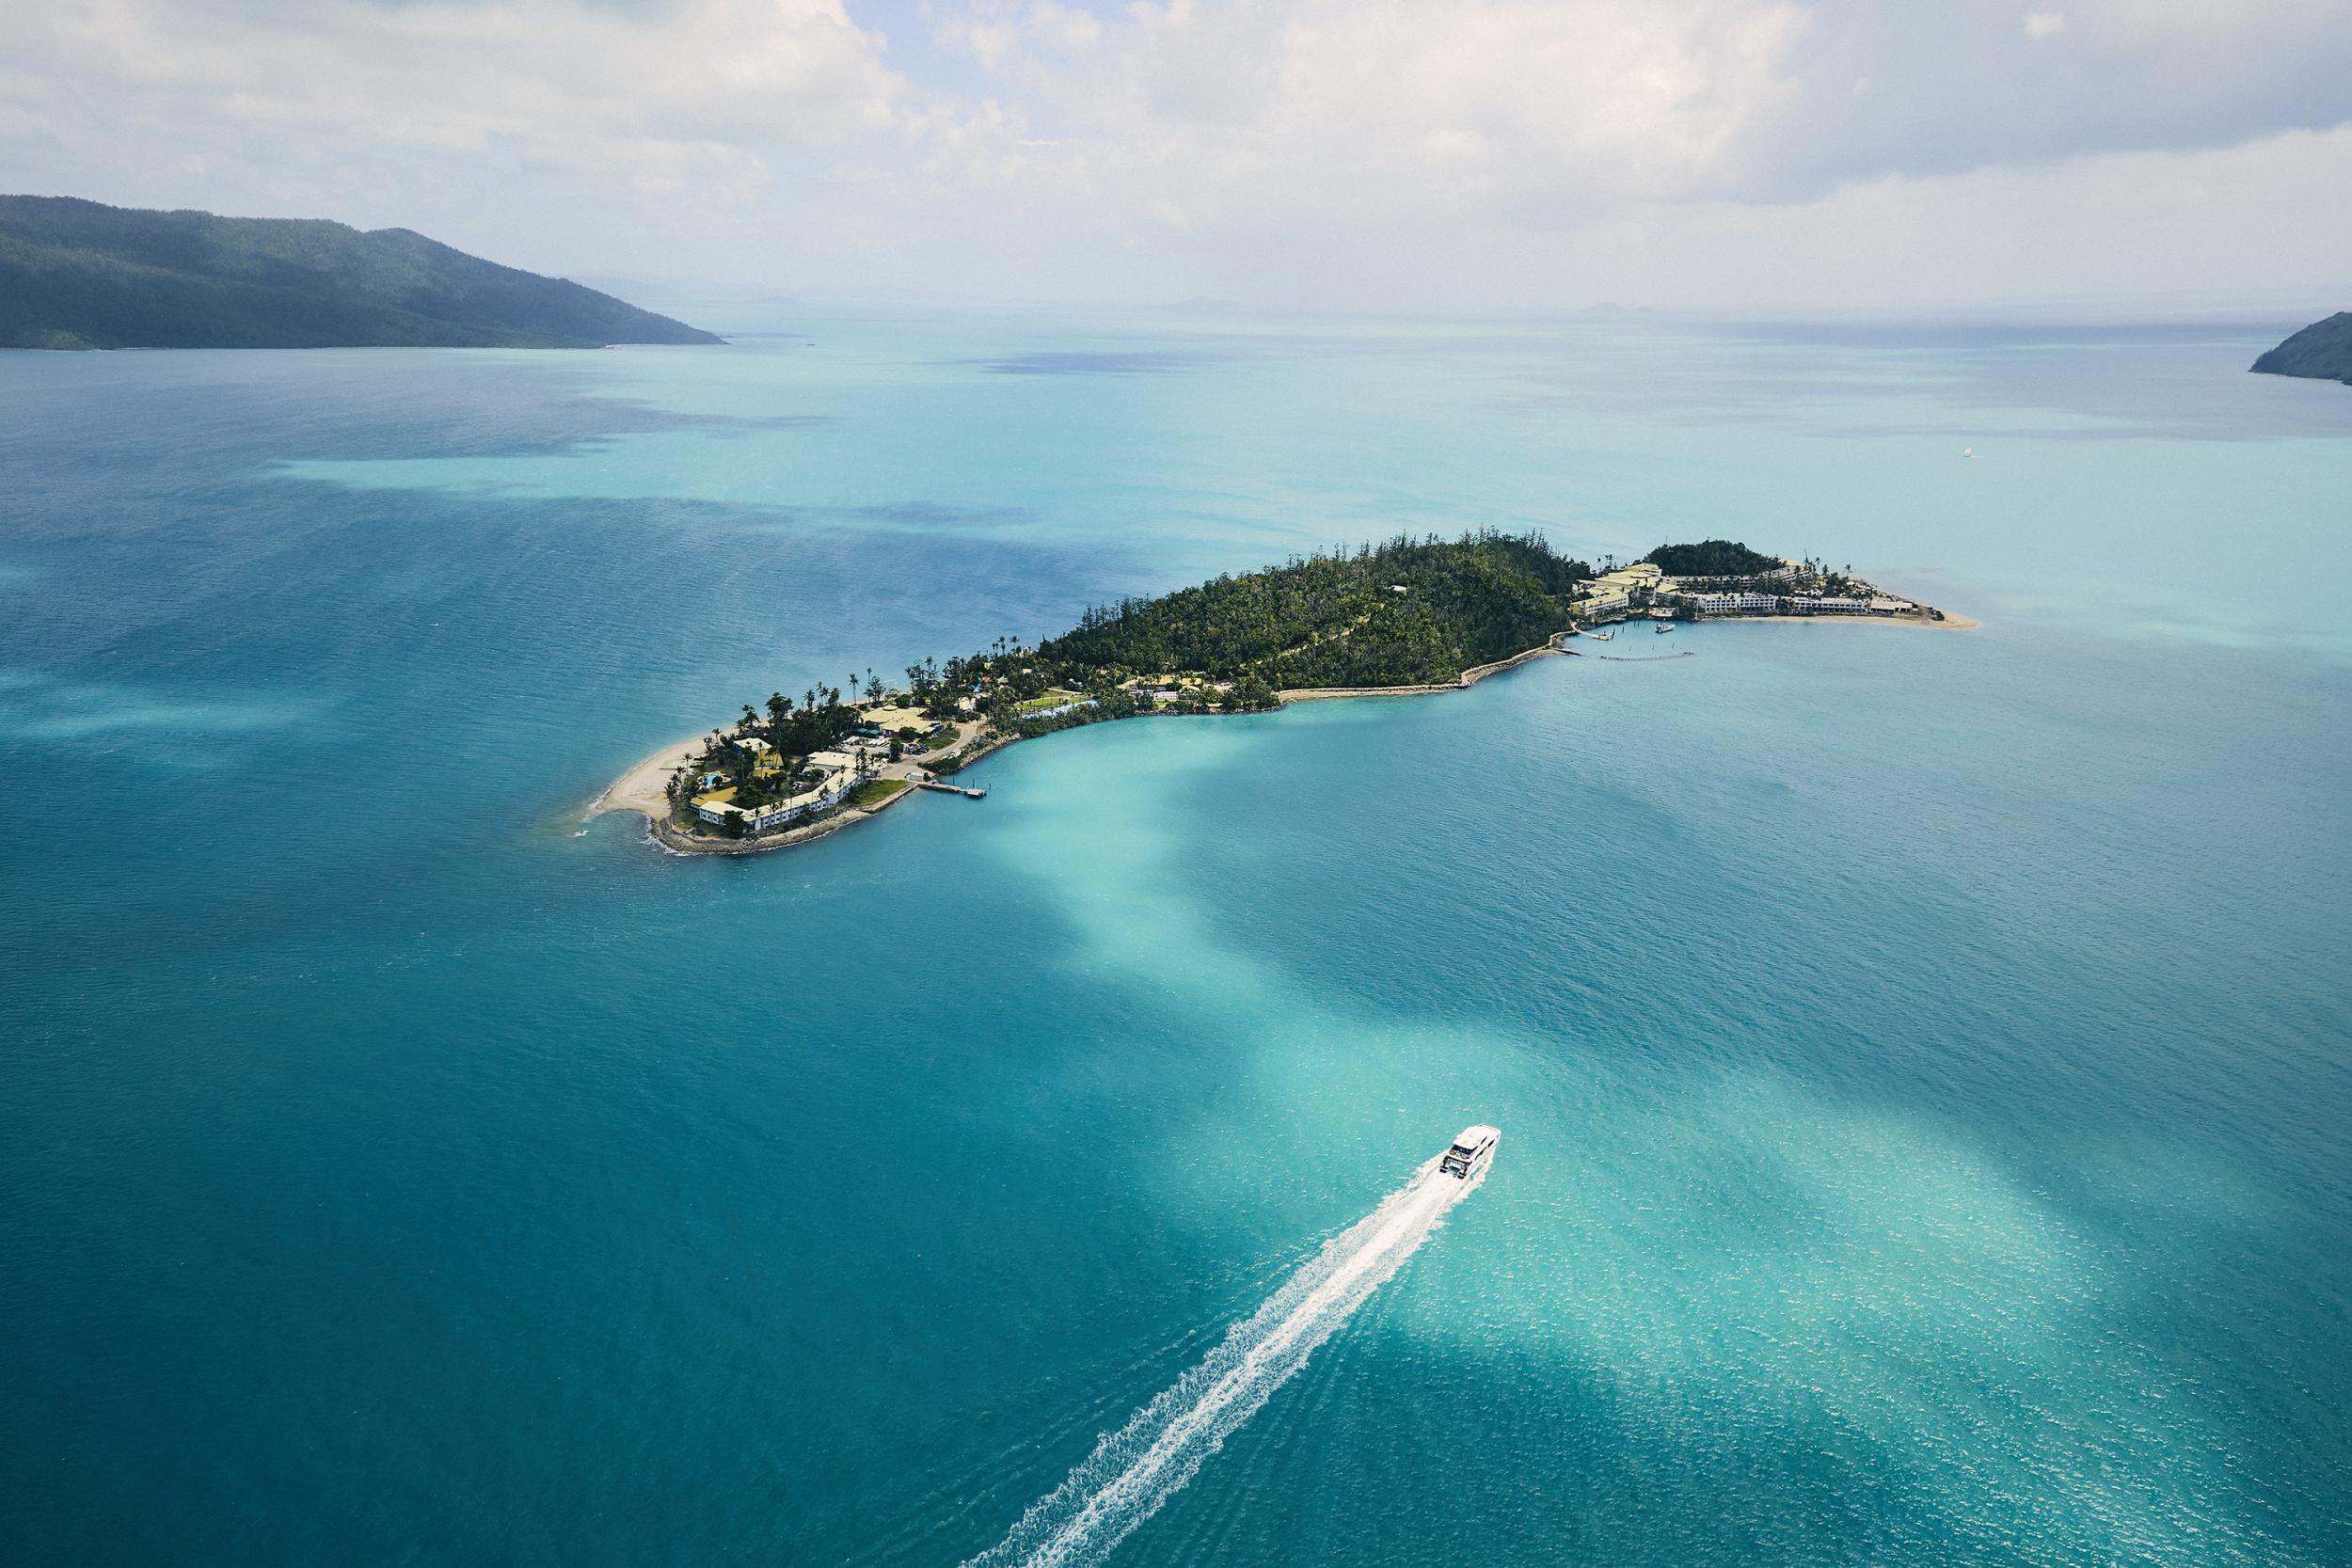 The resort is wrapped by a living coral lagoon with an underwater observatory